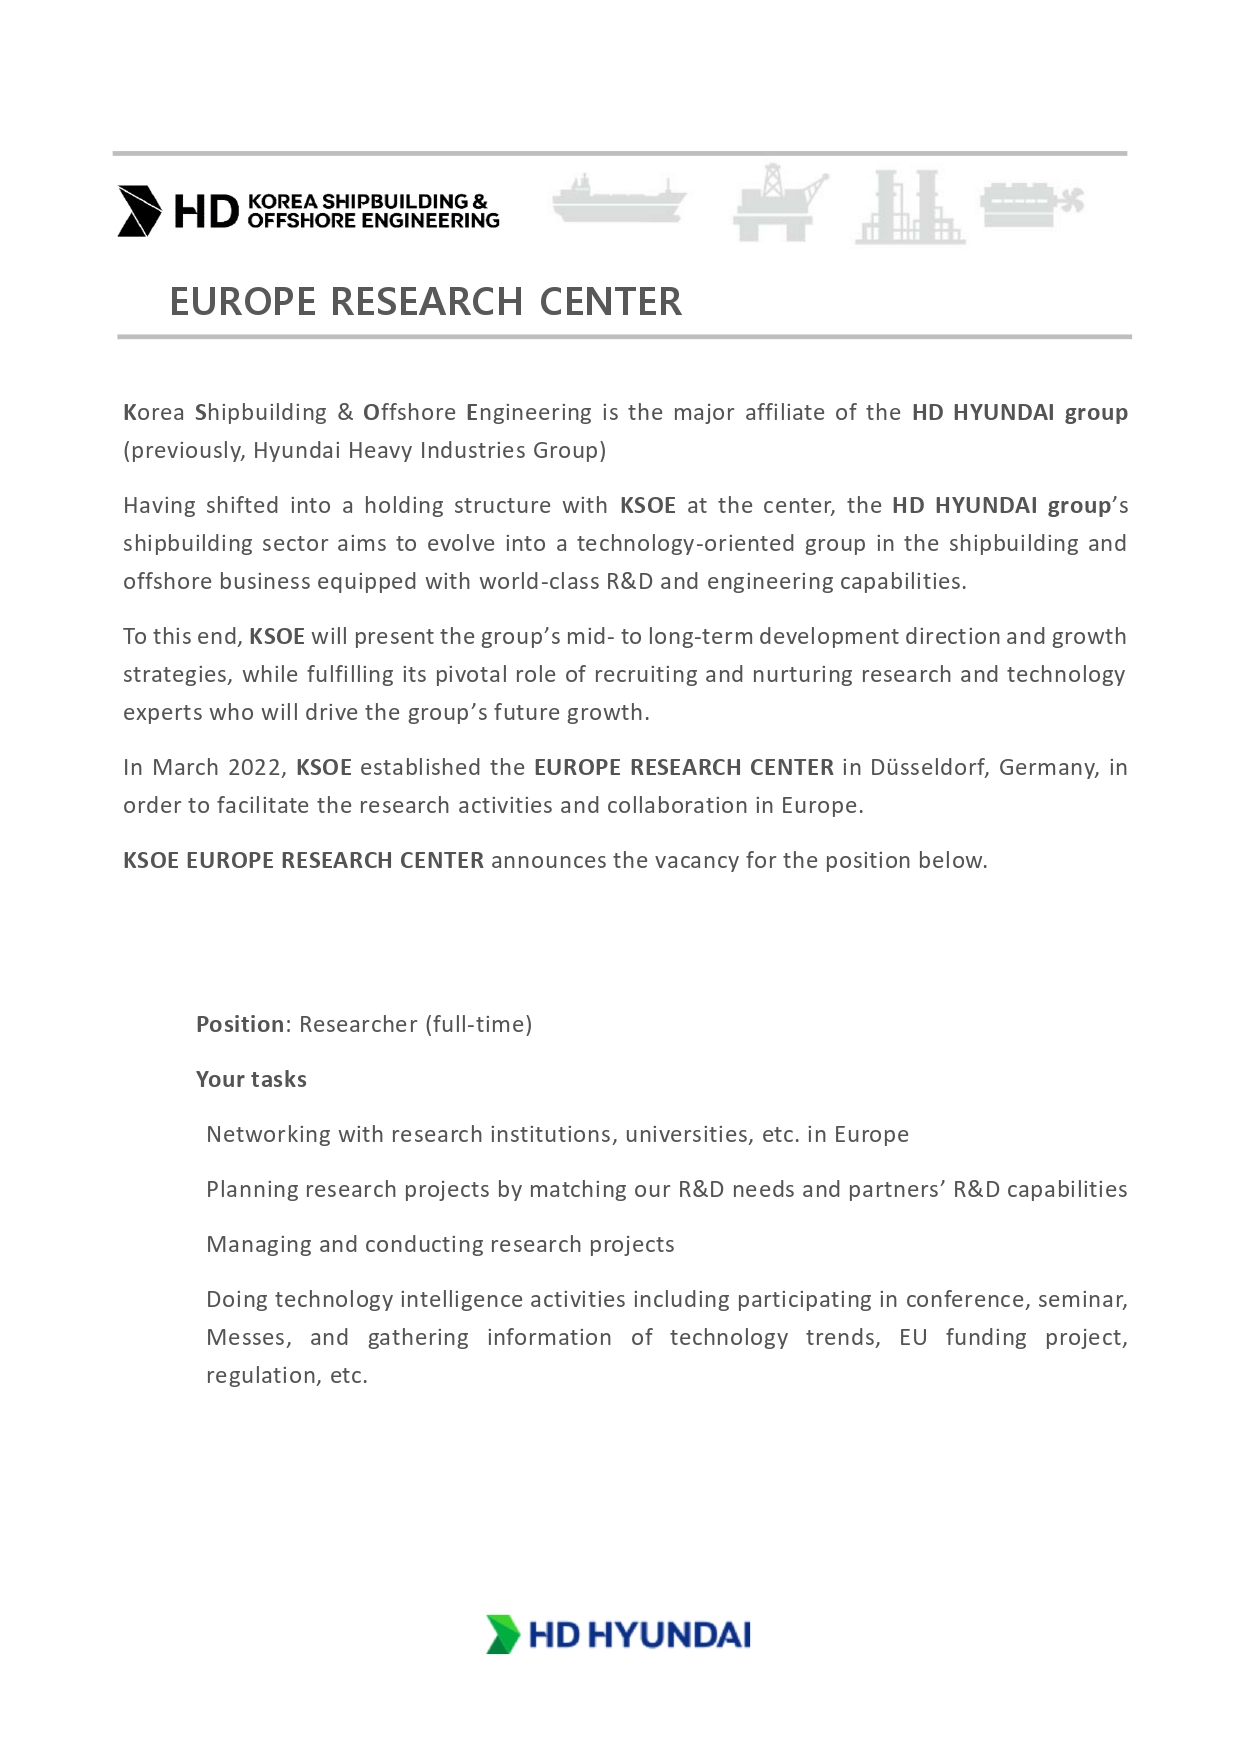 (HD Hyundai, KSOE Europe Research Center) Job vacancy for R&D planning_page-0001.jpg